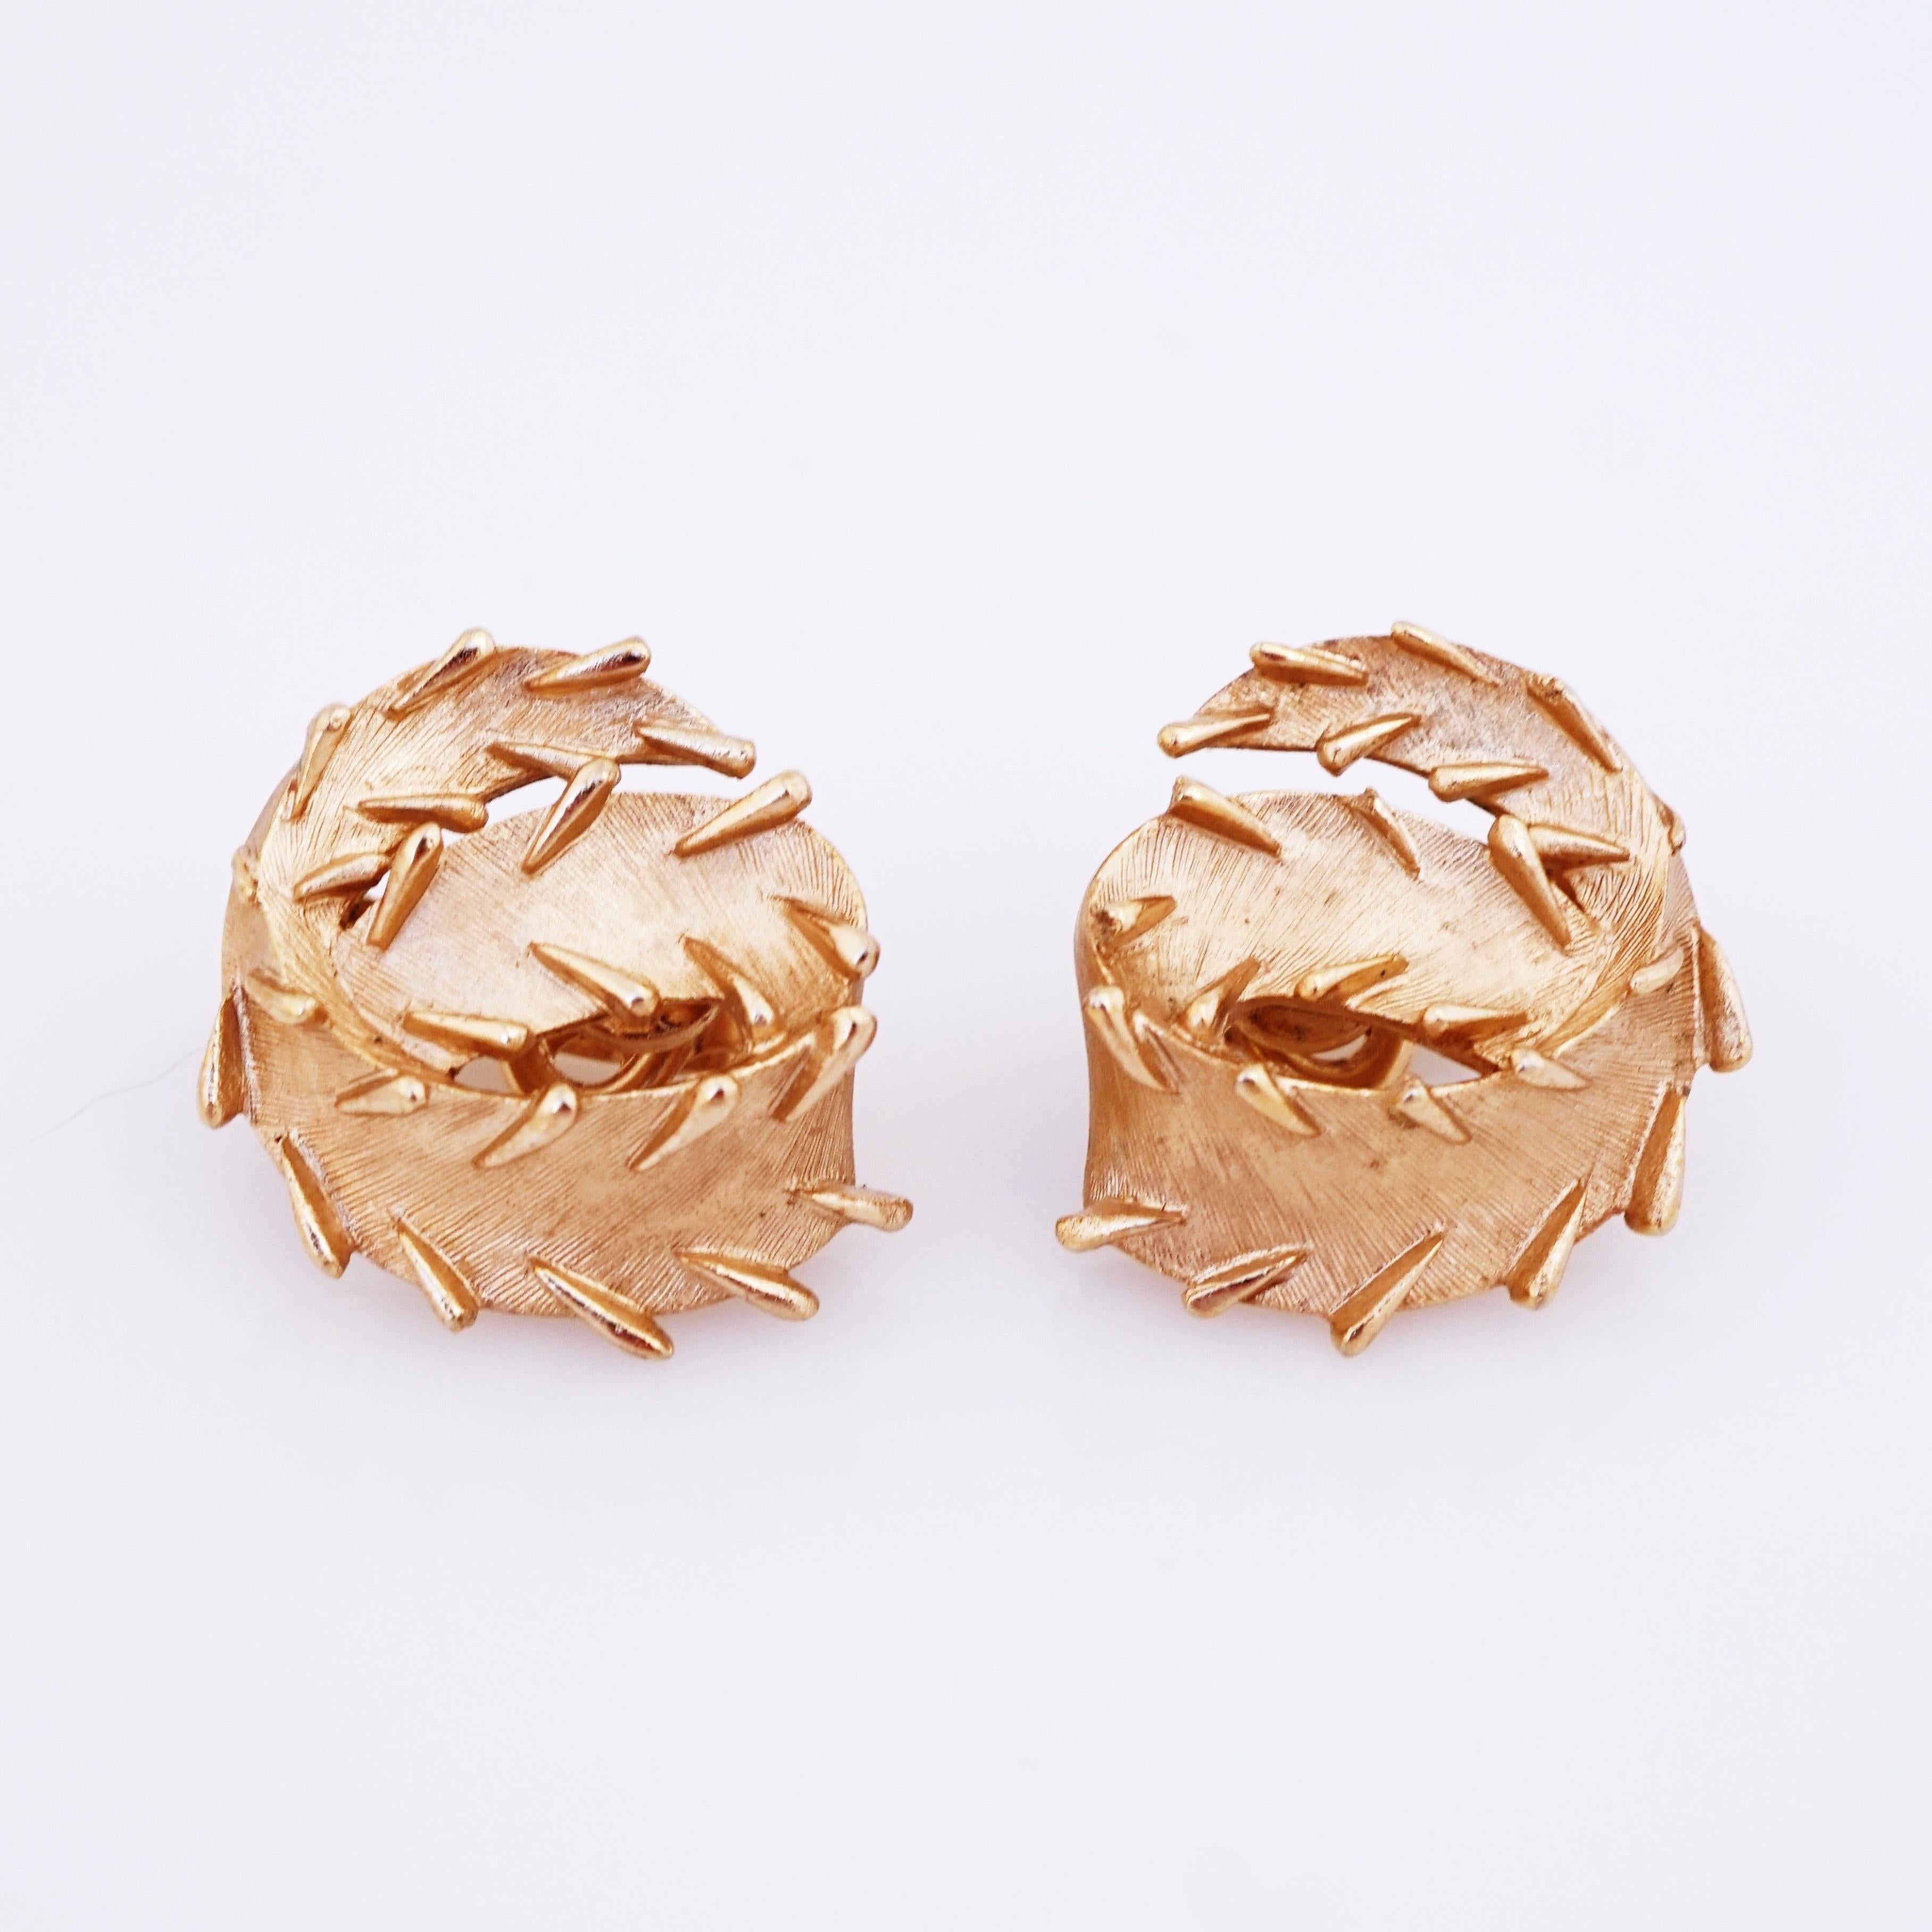 Modern Textured Gold Swirl Earrings With Stitch Detail By Crown Trifari, 1960s